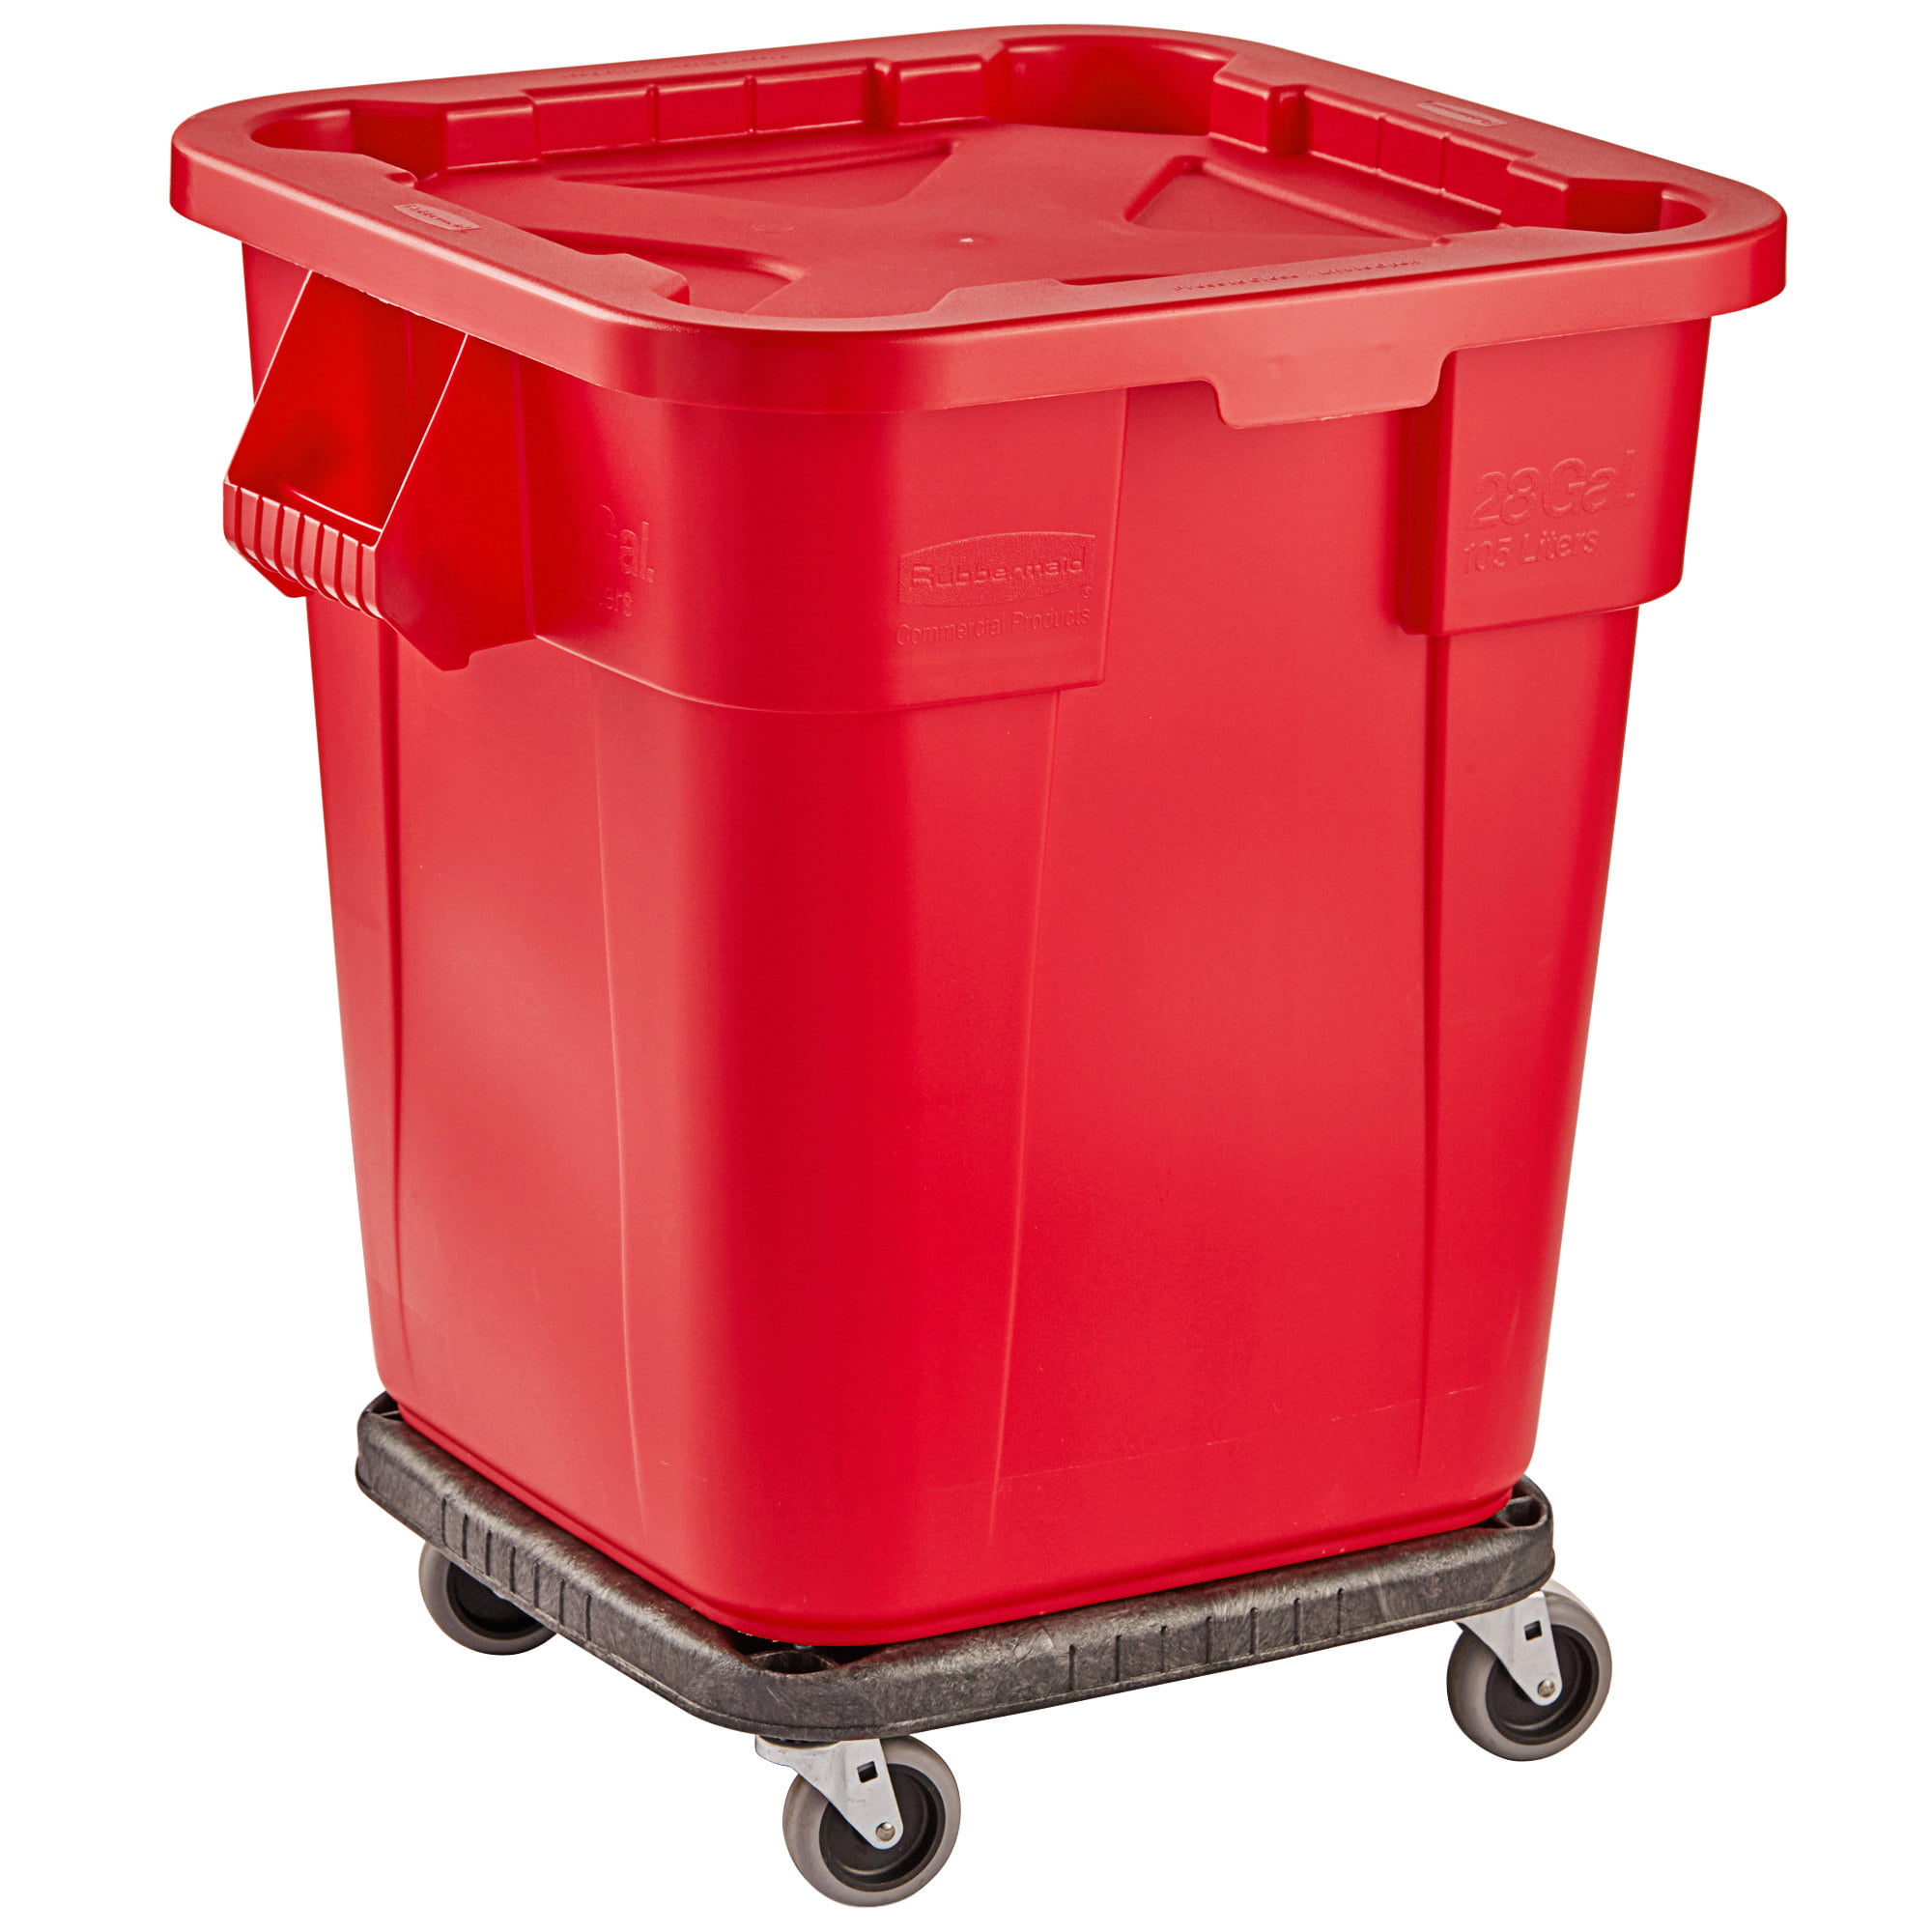 NEW Rubbermaid Commercial Swing Top Lid Untouchable  14.5 X 14.5 Square 